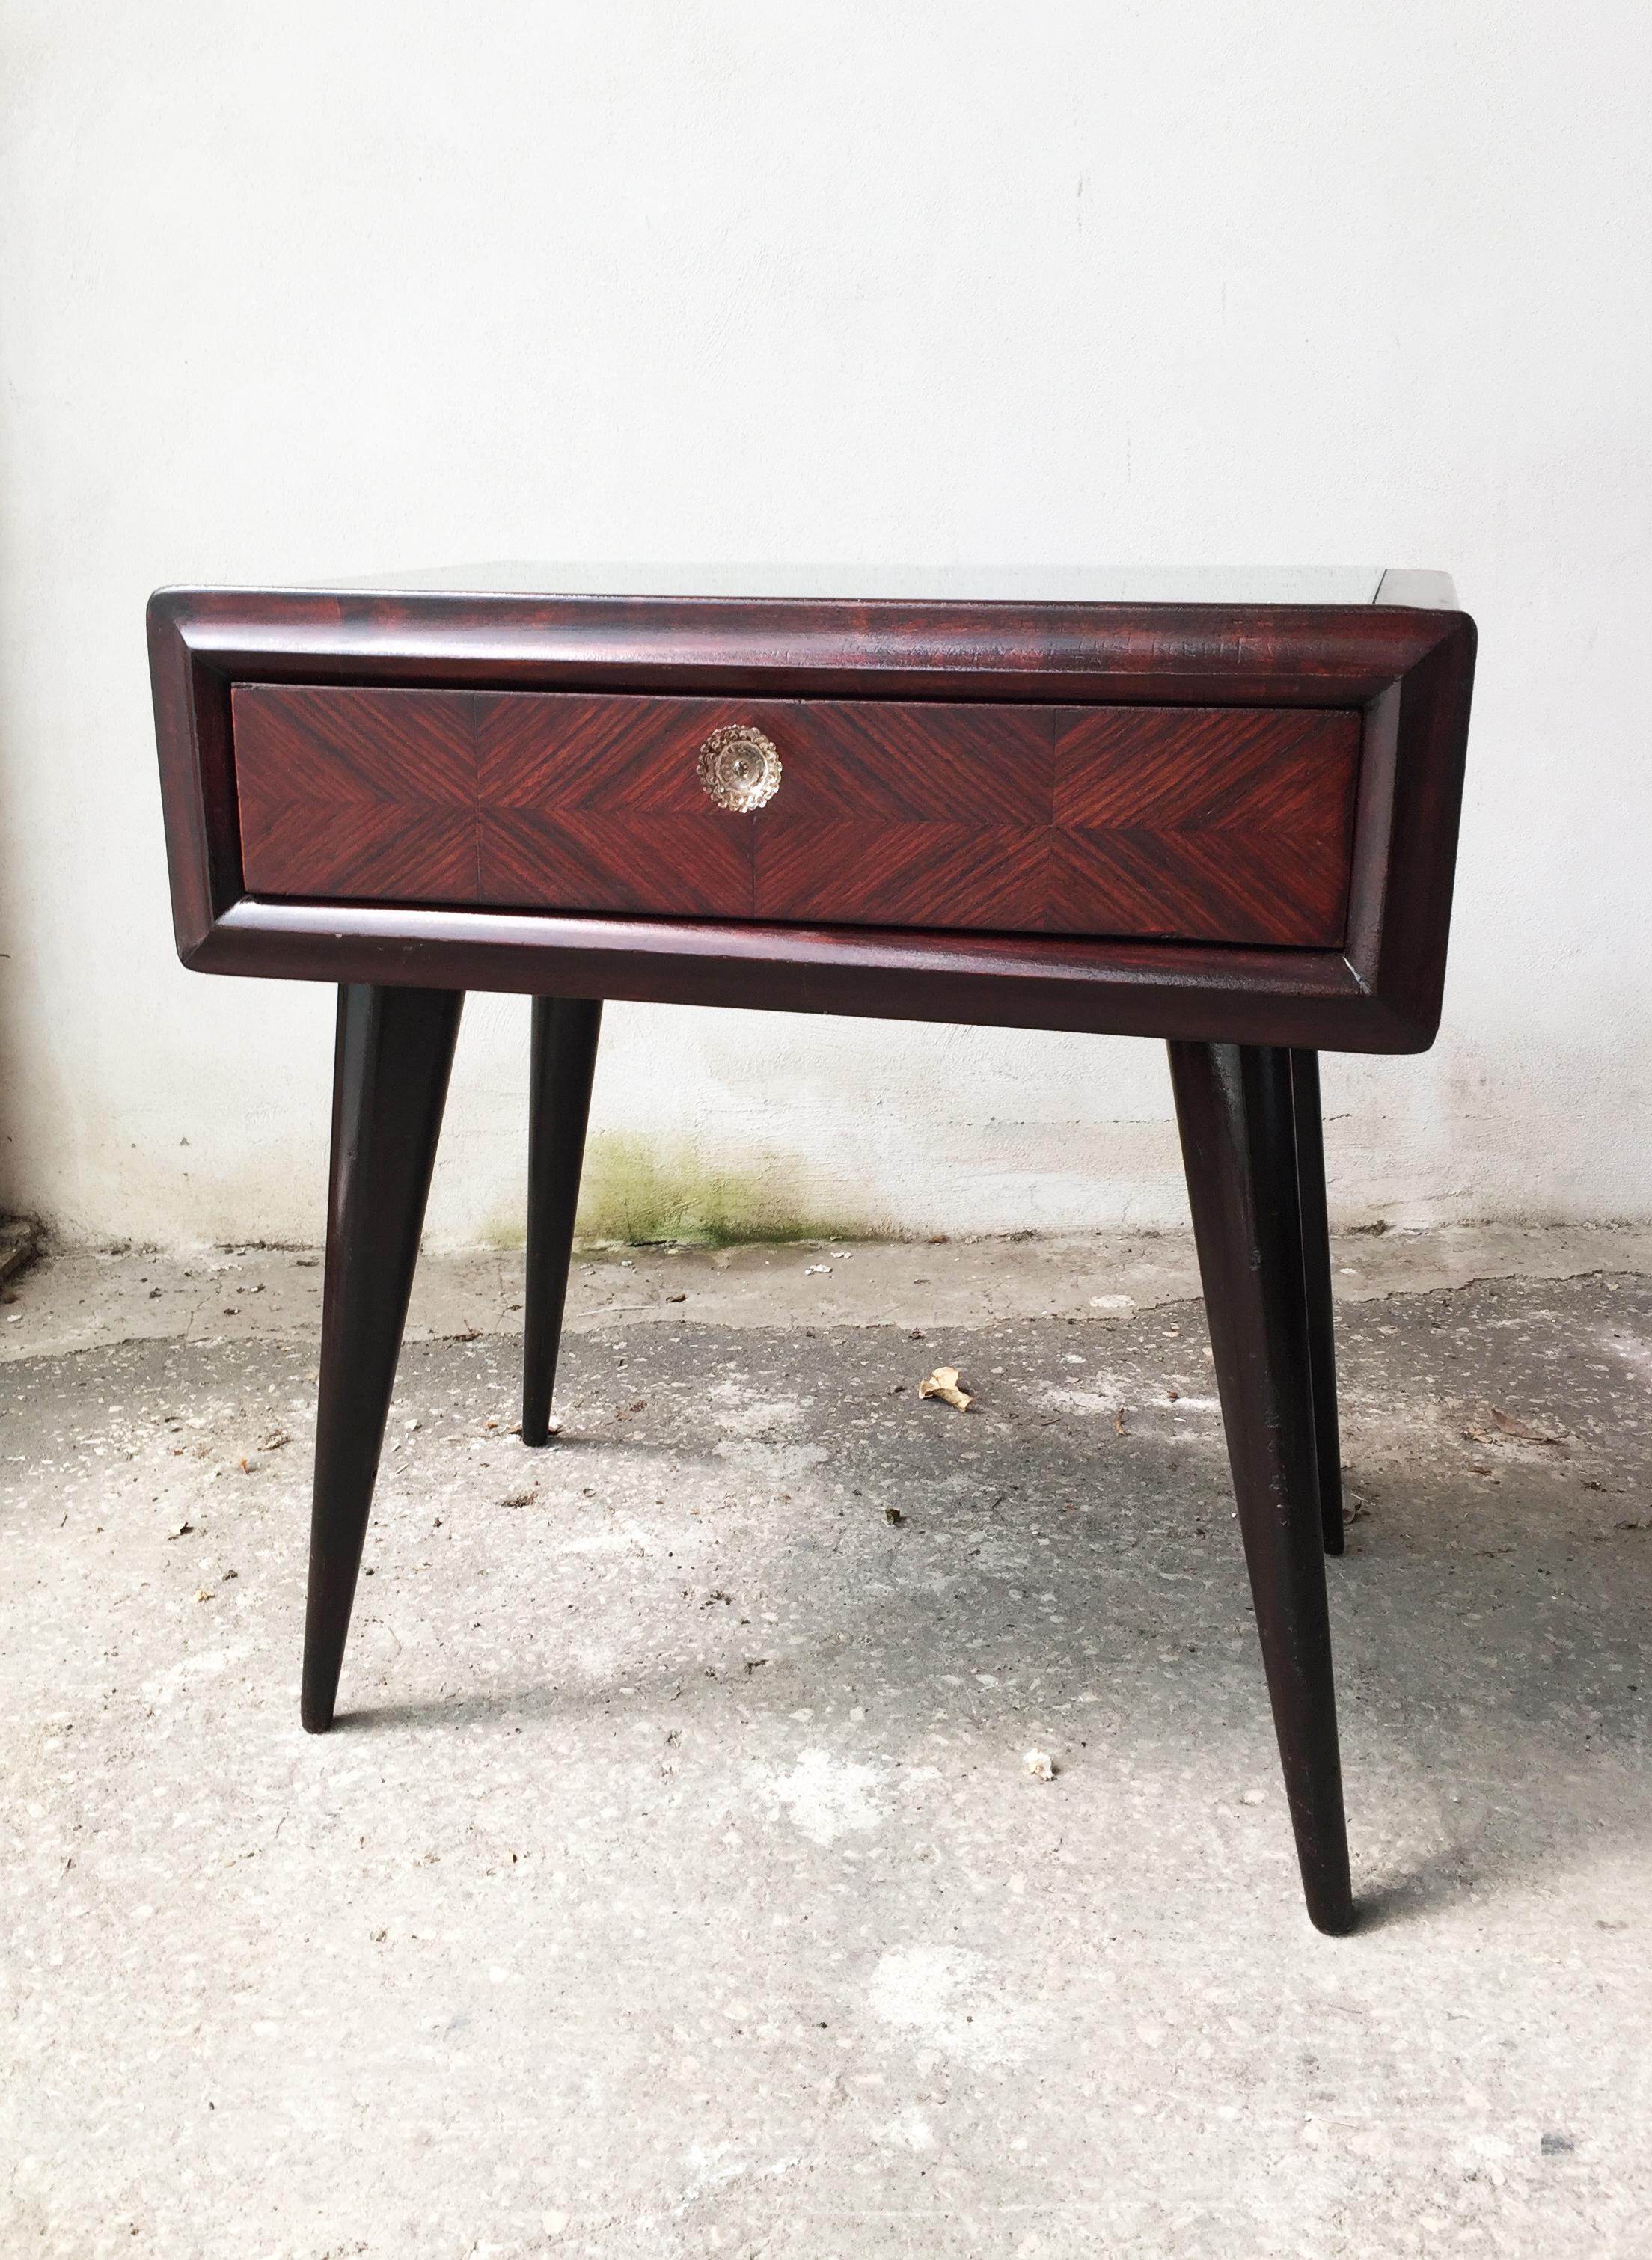 Beautiful nightstand in mahogany, rosewood and clear glass on top.
There is also one drawer with a beautiful glass handle and amazing veneer on the frontal side.
Four conical legs completed the beauty of this piece.